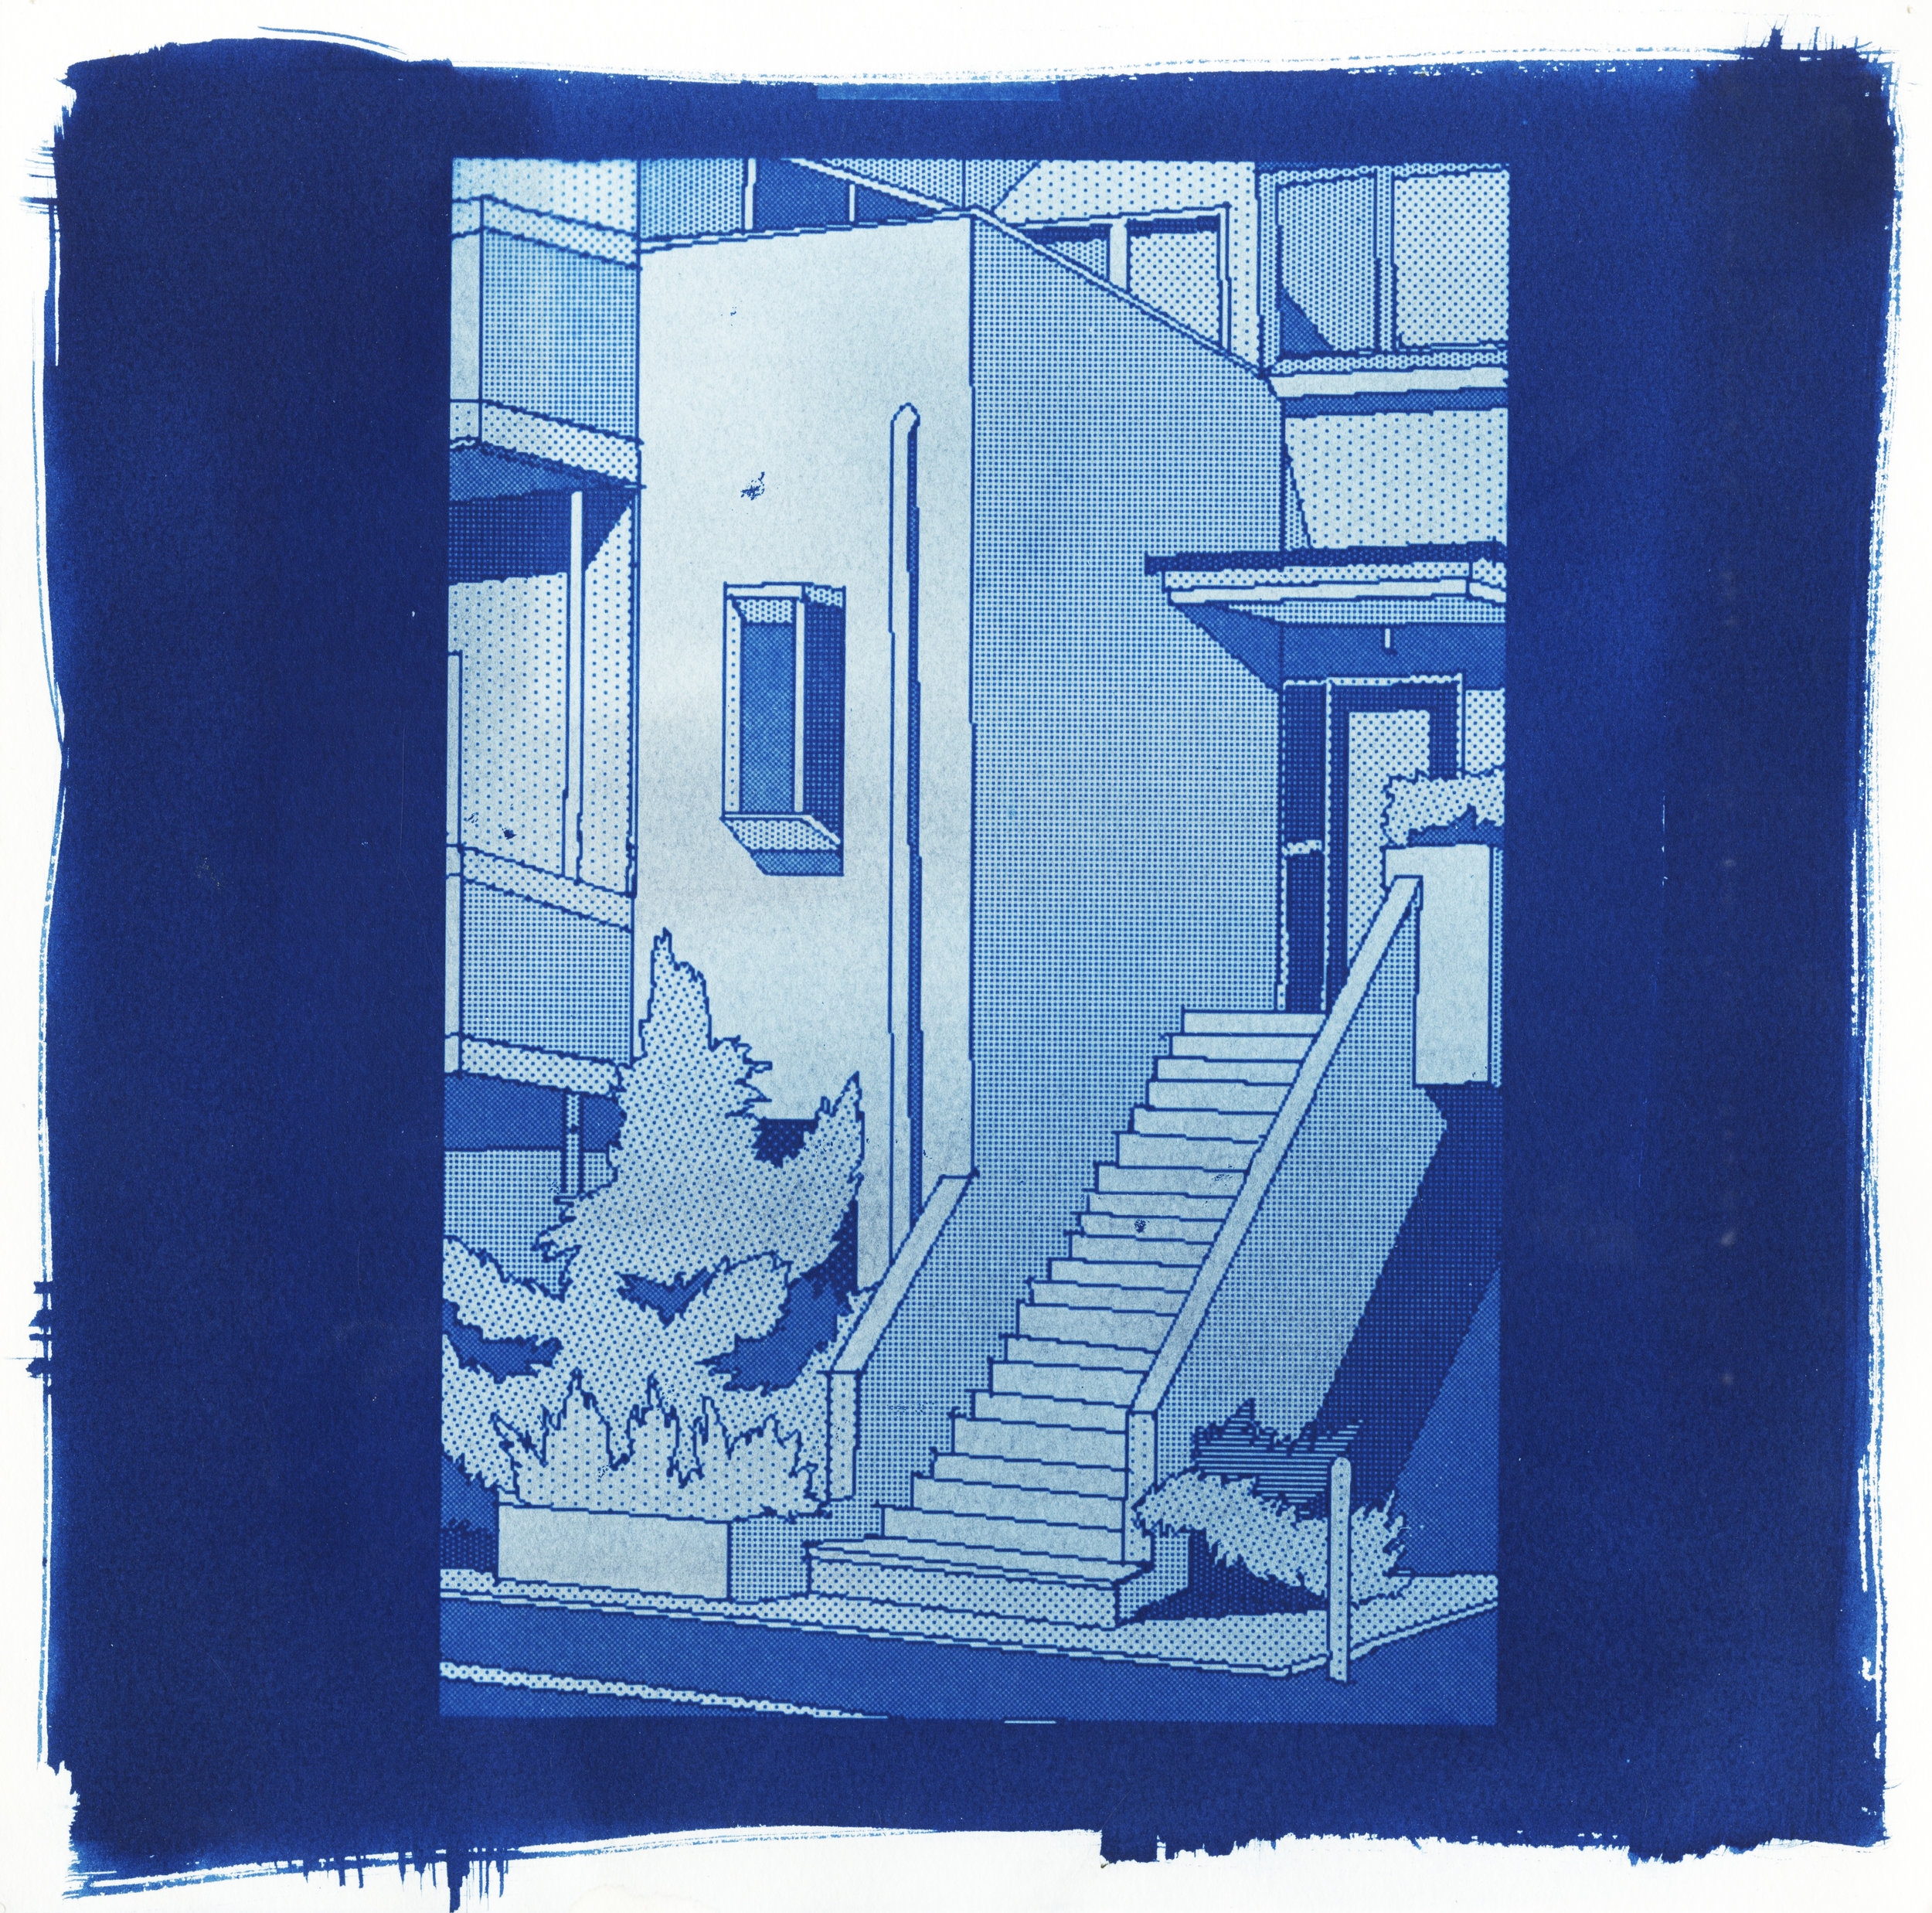   A House I've Never Been Inside No. 3  cyanotype on watercolor paper 12 x 12 in. 2017 